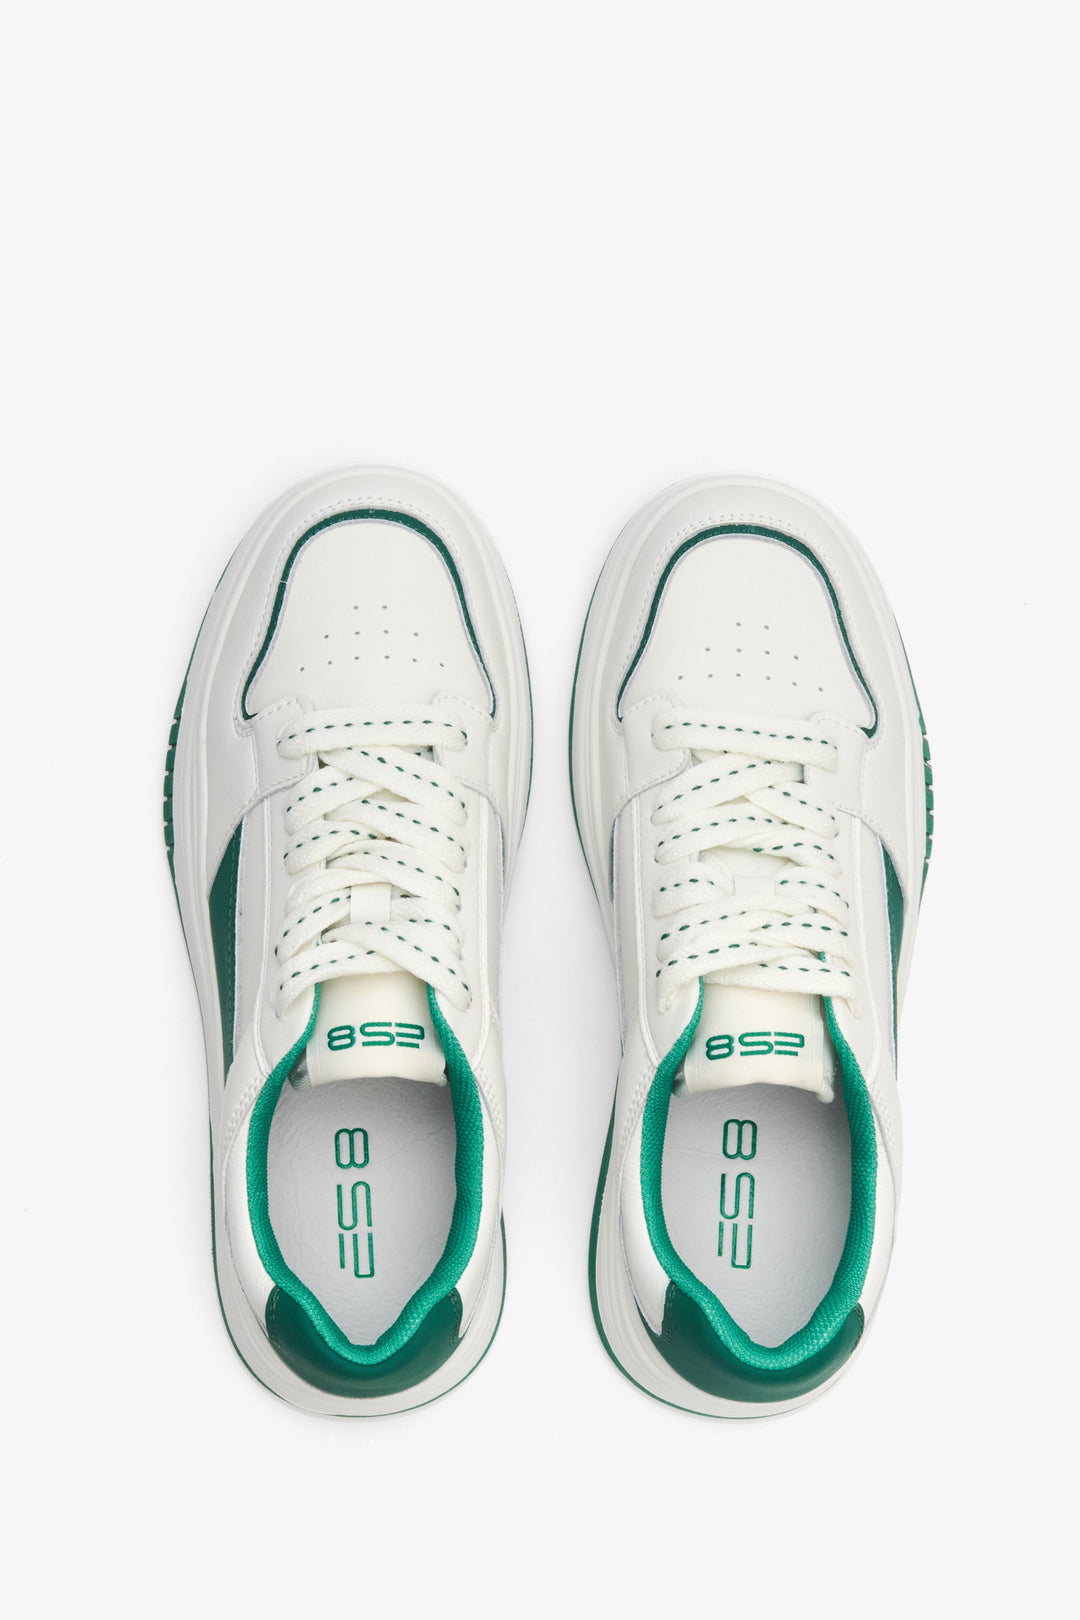 Women's white and green leather sneakers ES8 - presentation of the footwear from above.